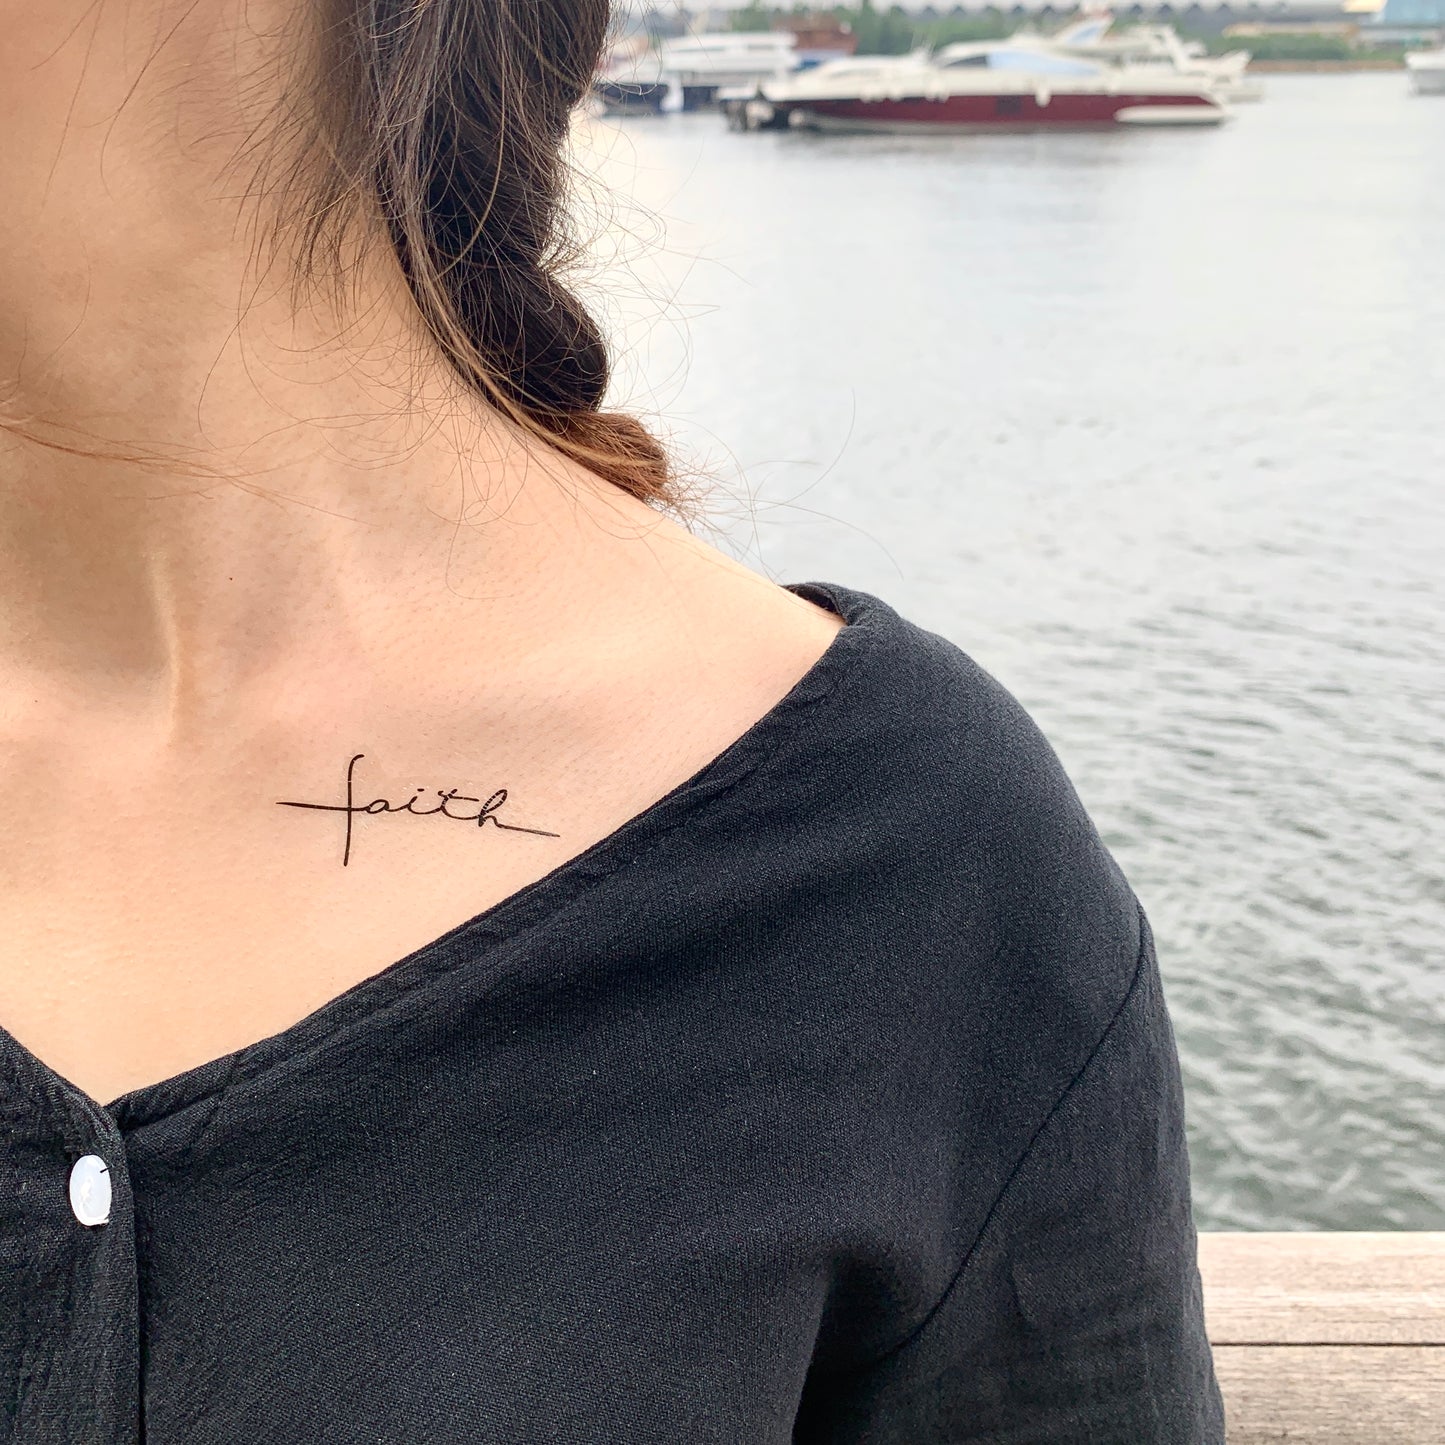 fake small holy faith cross quote religious symbol lettering temporary tattoo sticker design idea on collarbone